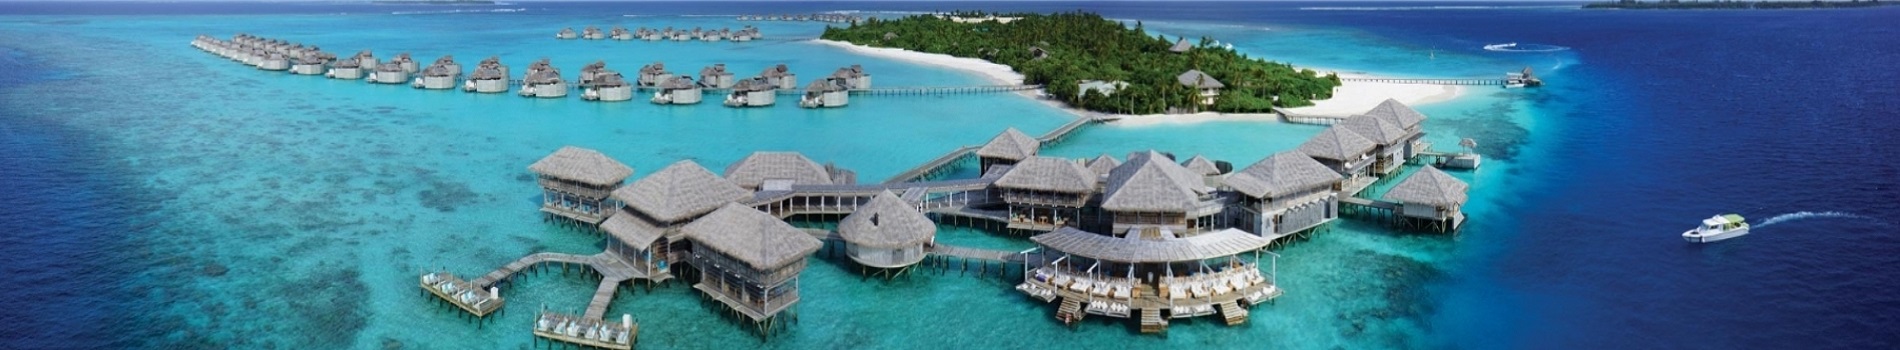 maldives tour package for couple from kerala